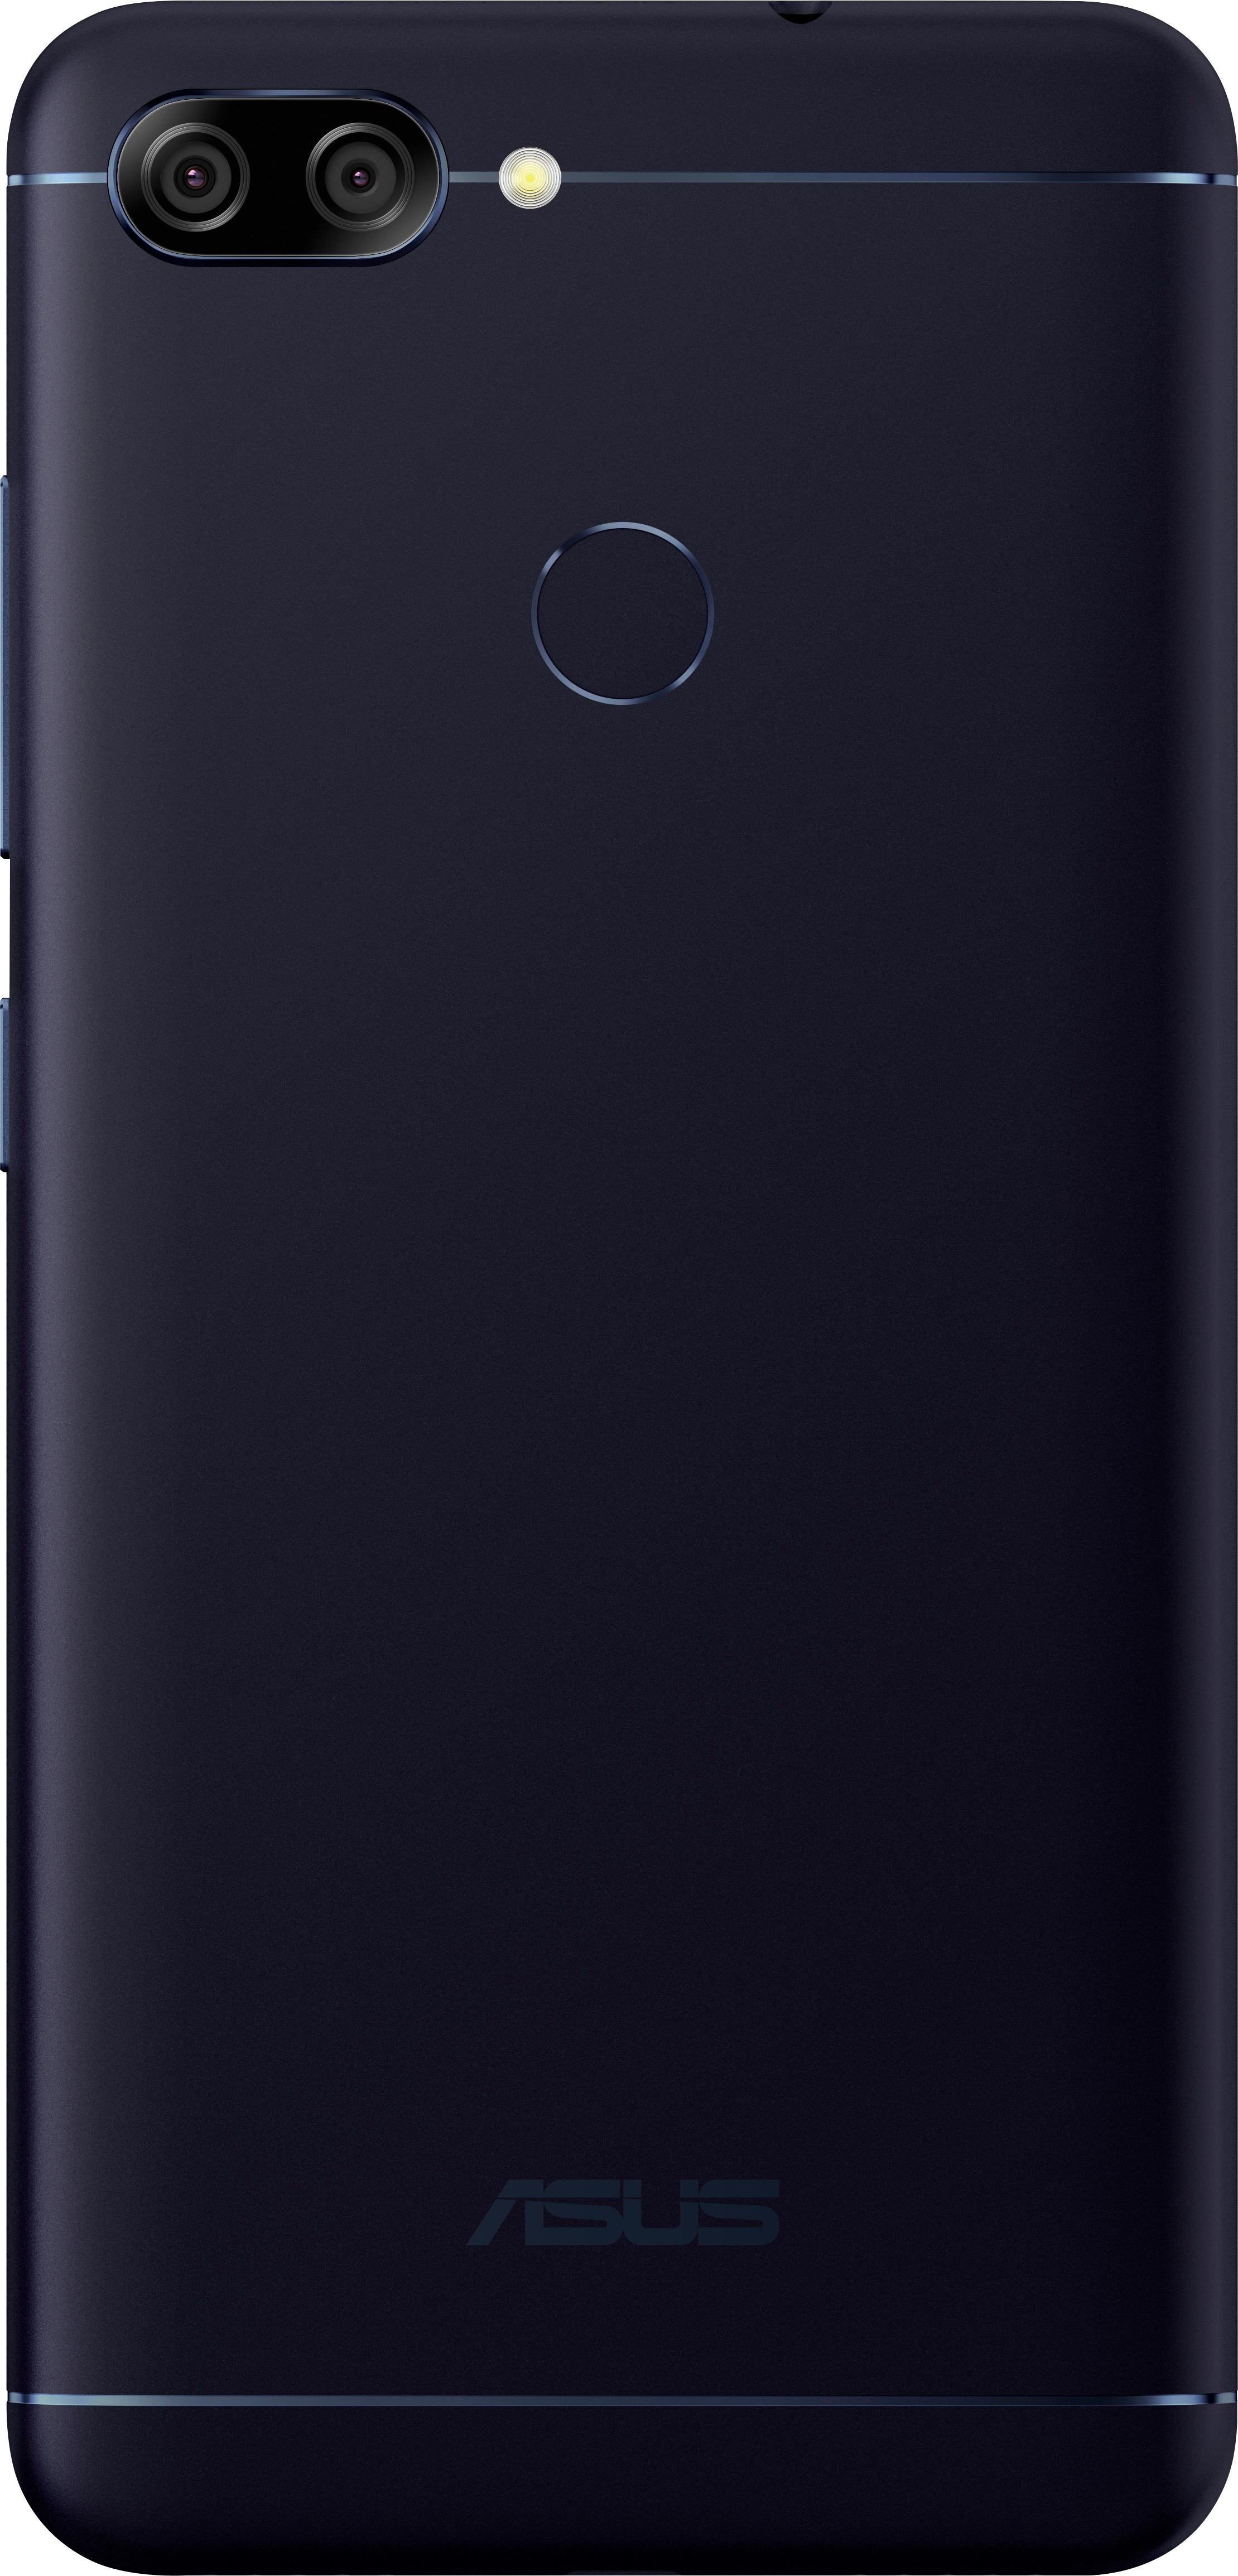 Best Buy: ASUS ZenFone Max Plus M1 4G LTE with 32GB Memory Cell